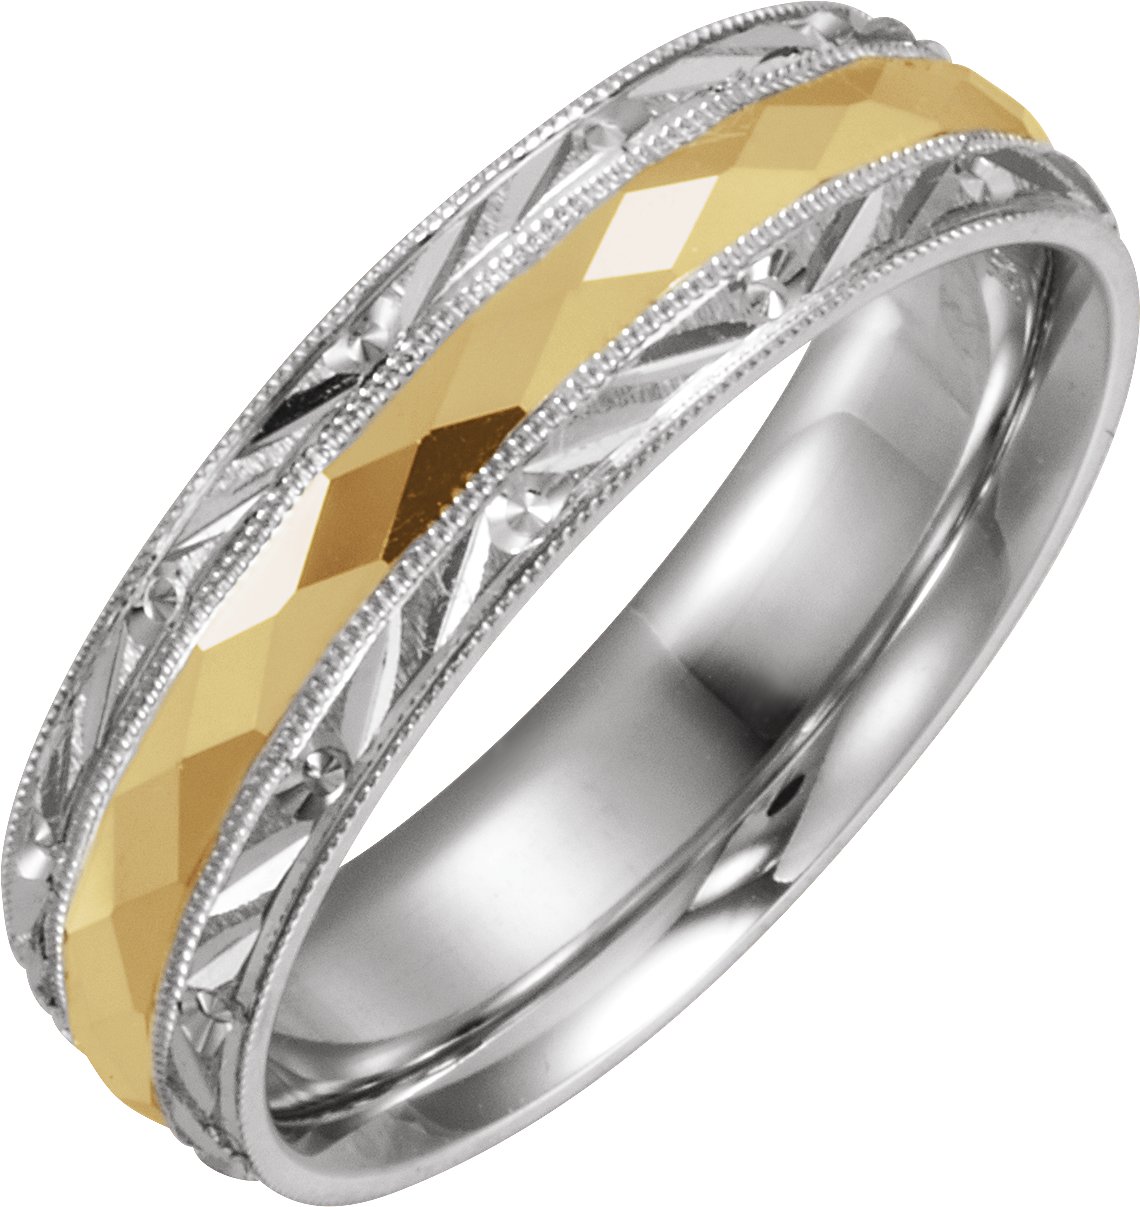 14K White/Yellow 6 mm Design-Engraved Band with Milgrain Size 10.5